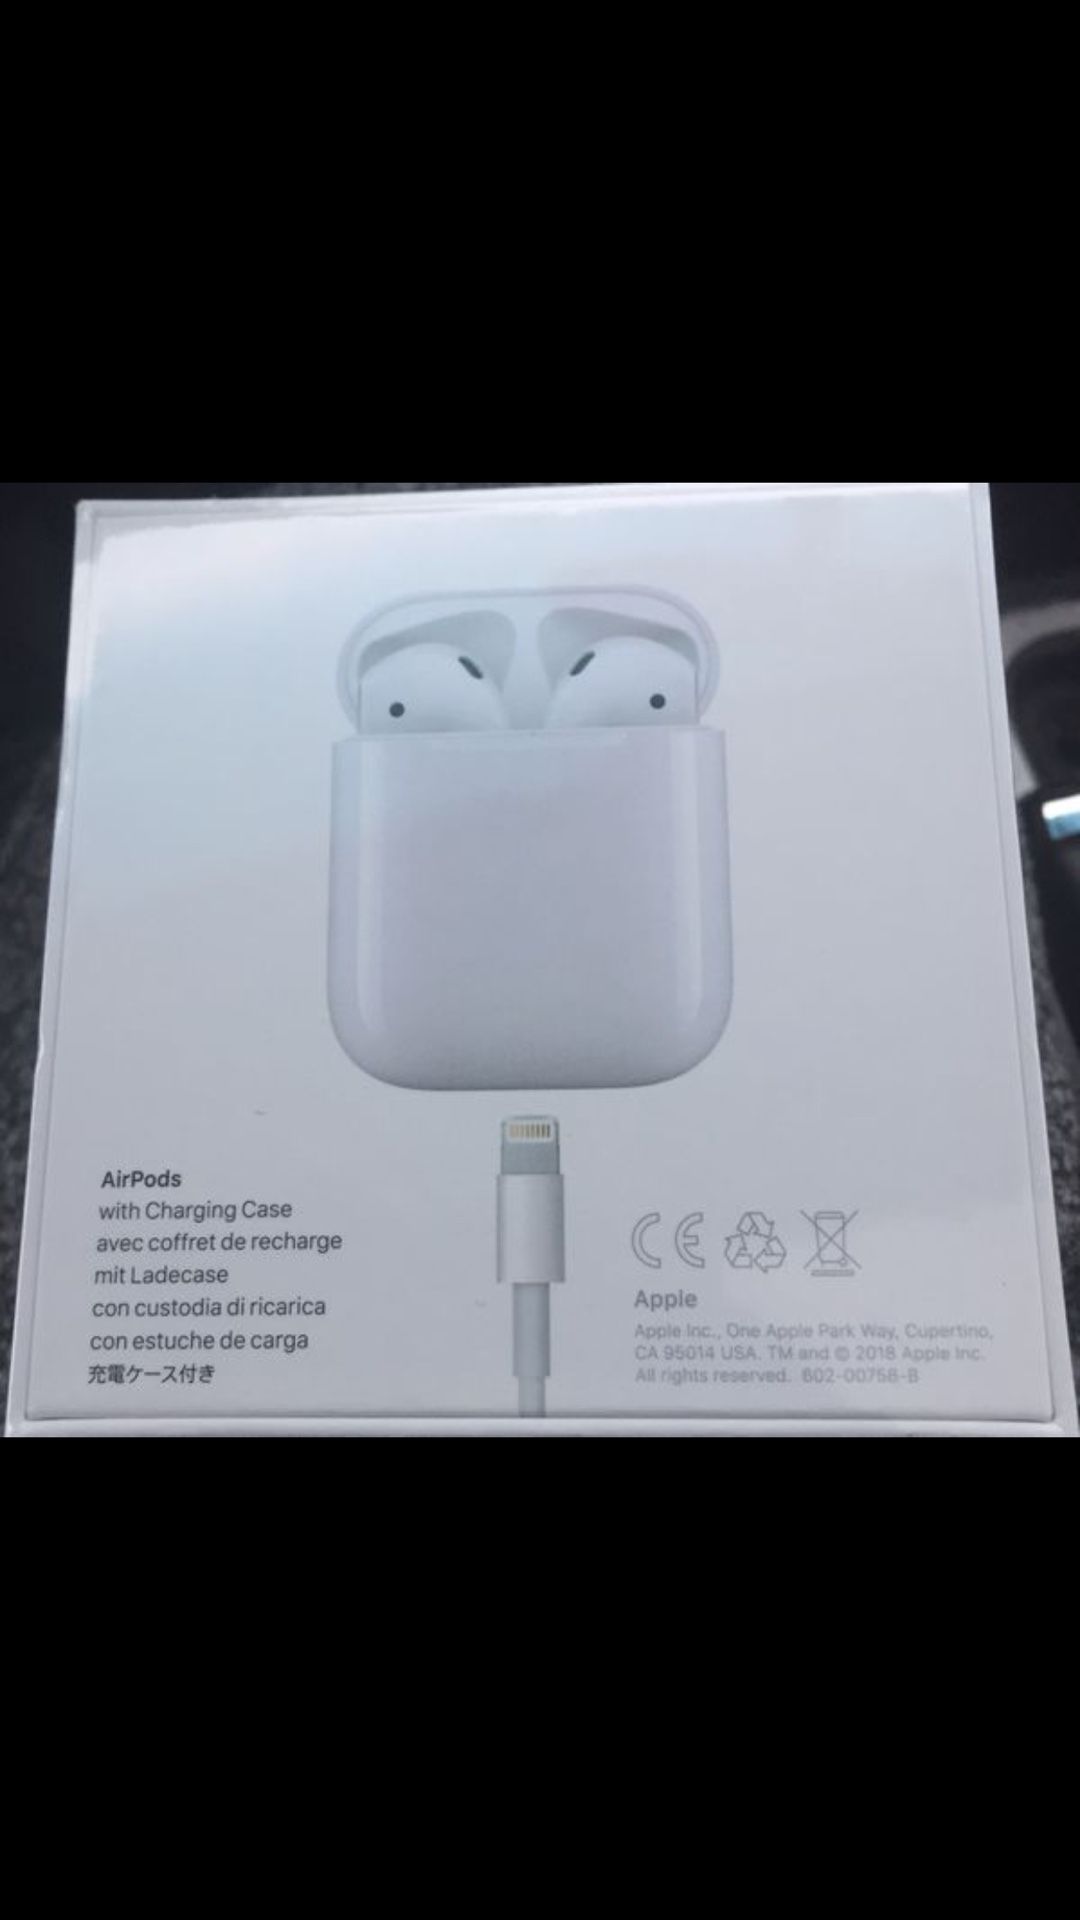 Apple AirPods 2nd Generation sealed